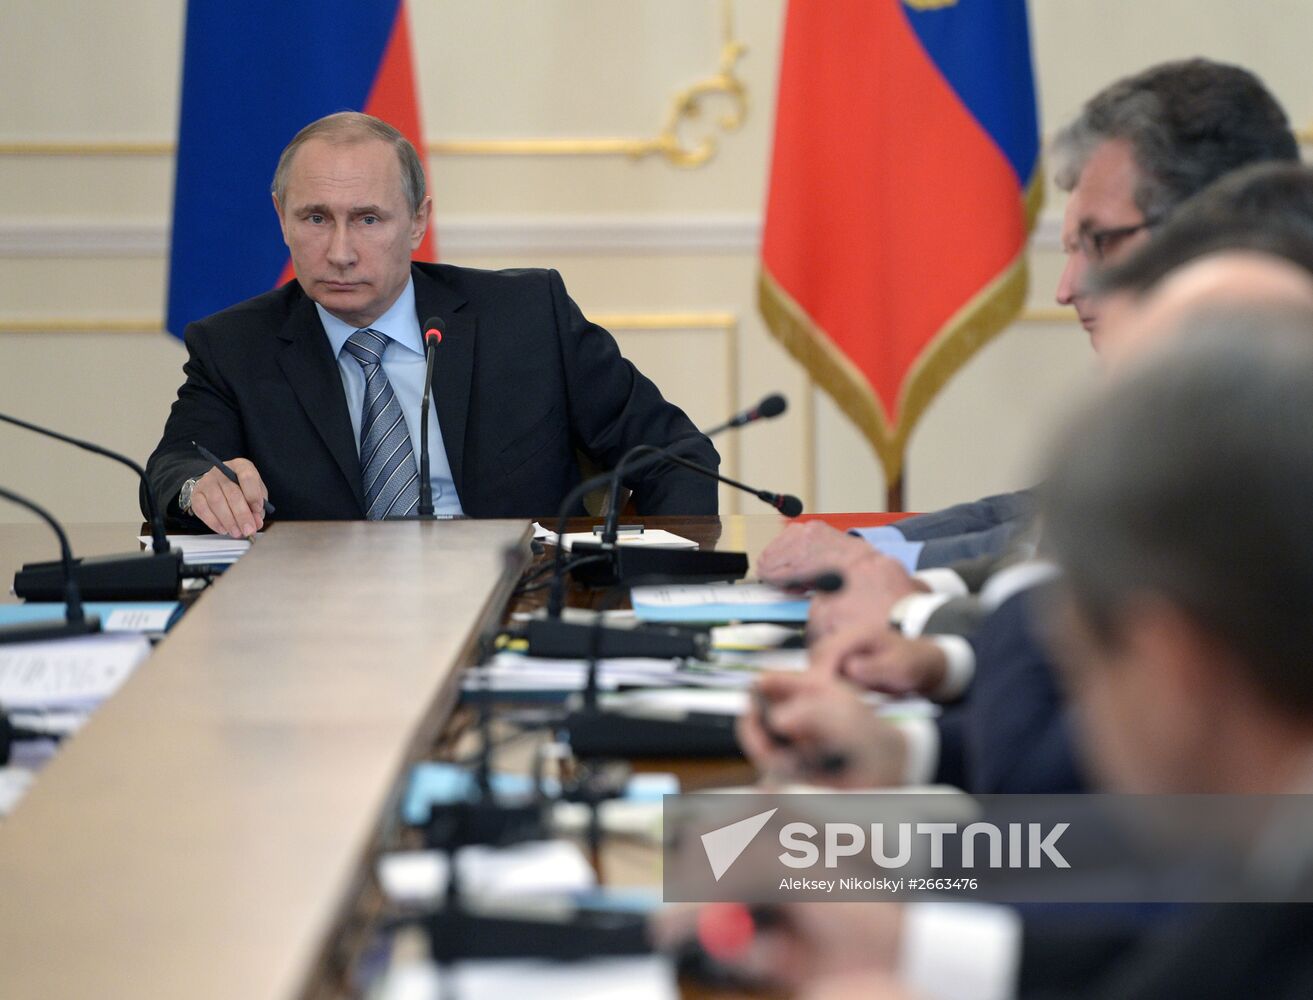 President Putin meets with Russian Government